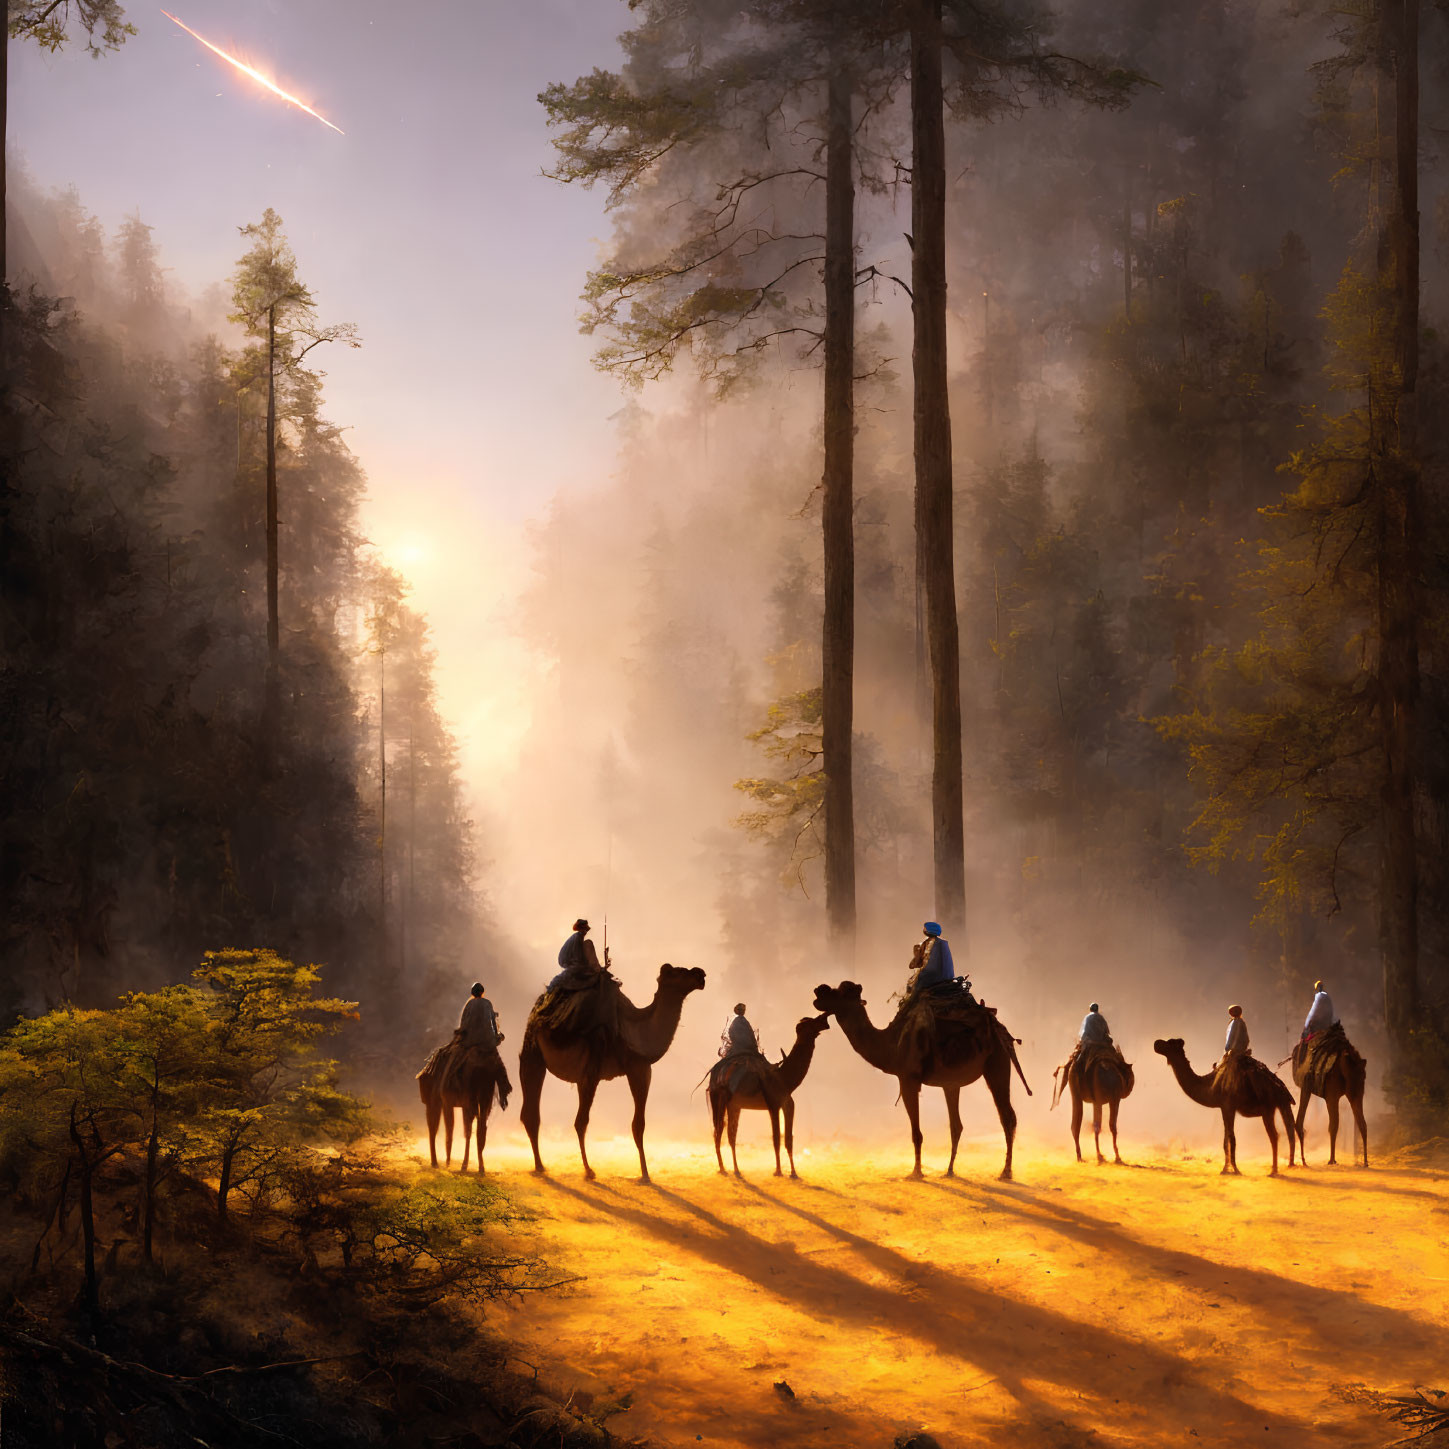 Forest sunrise with camel caravan and figures in misty light